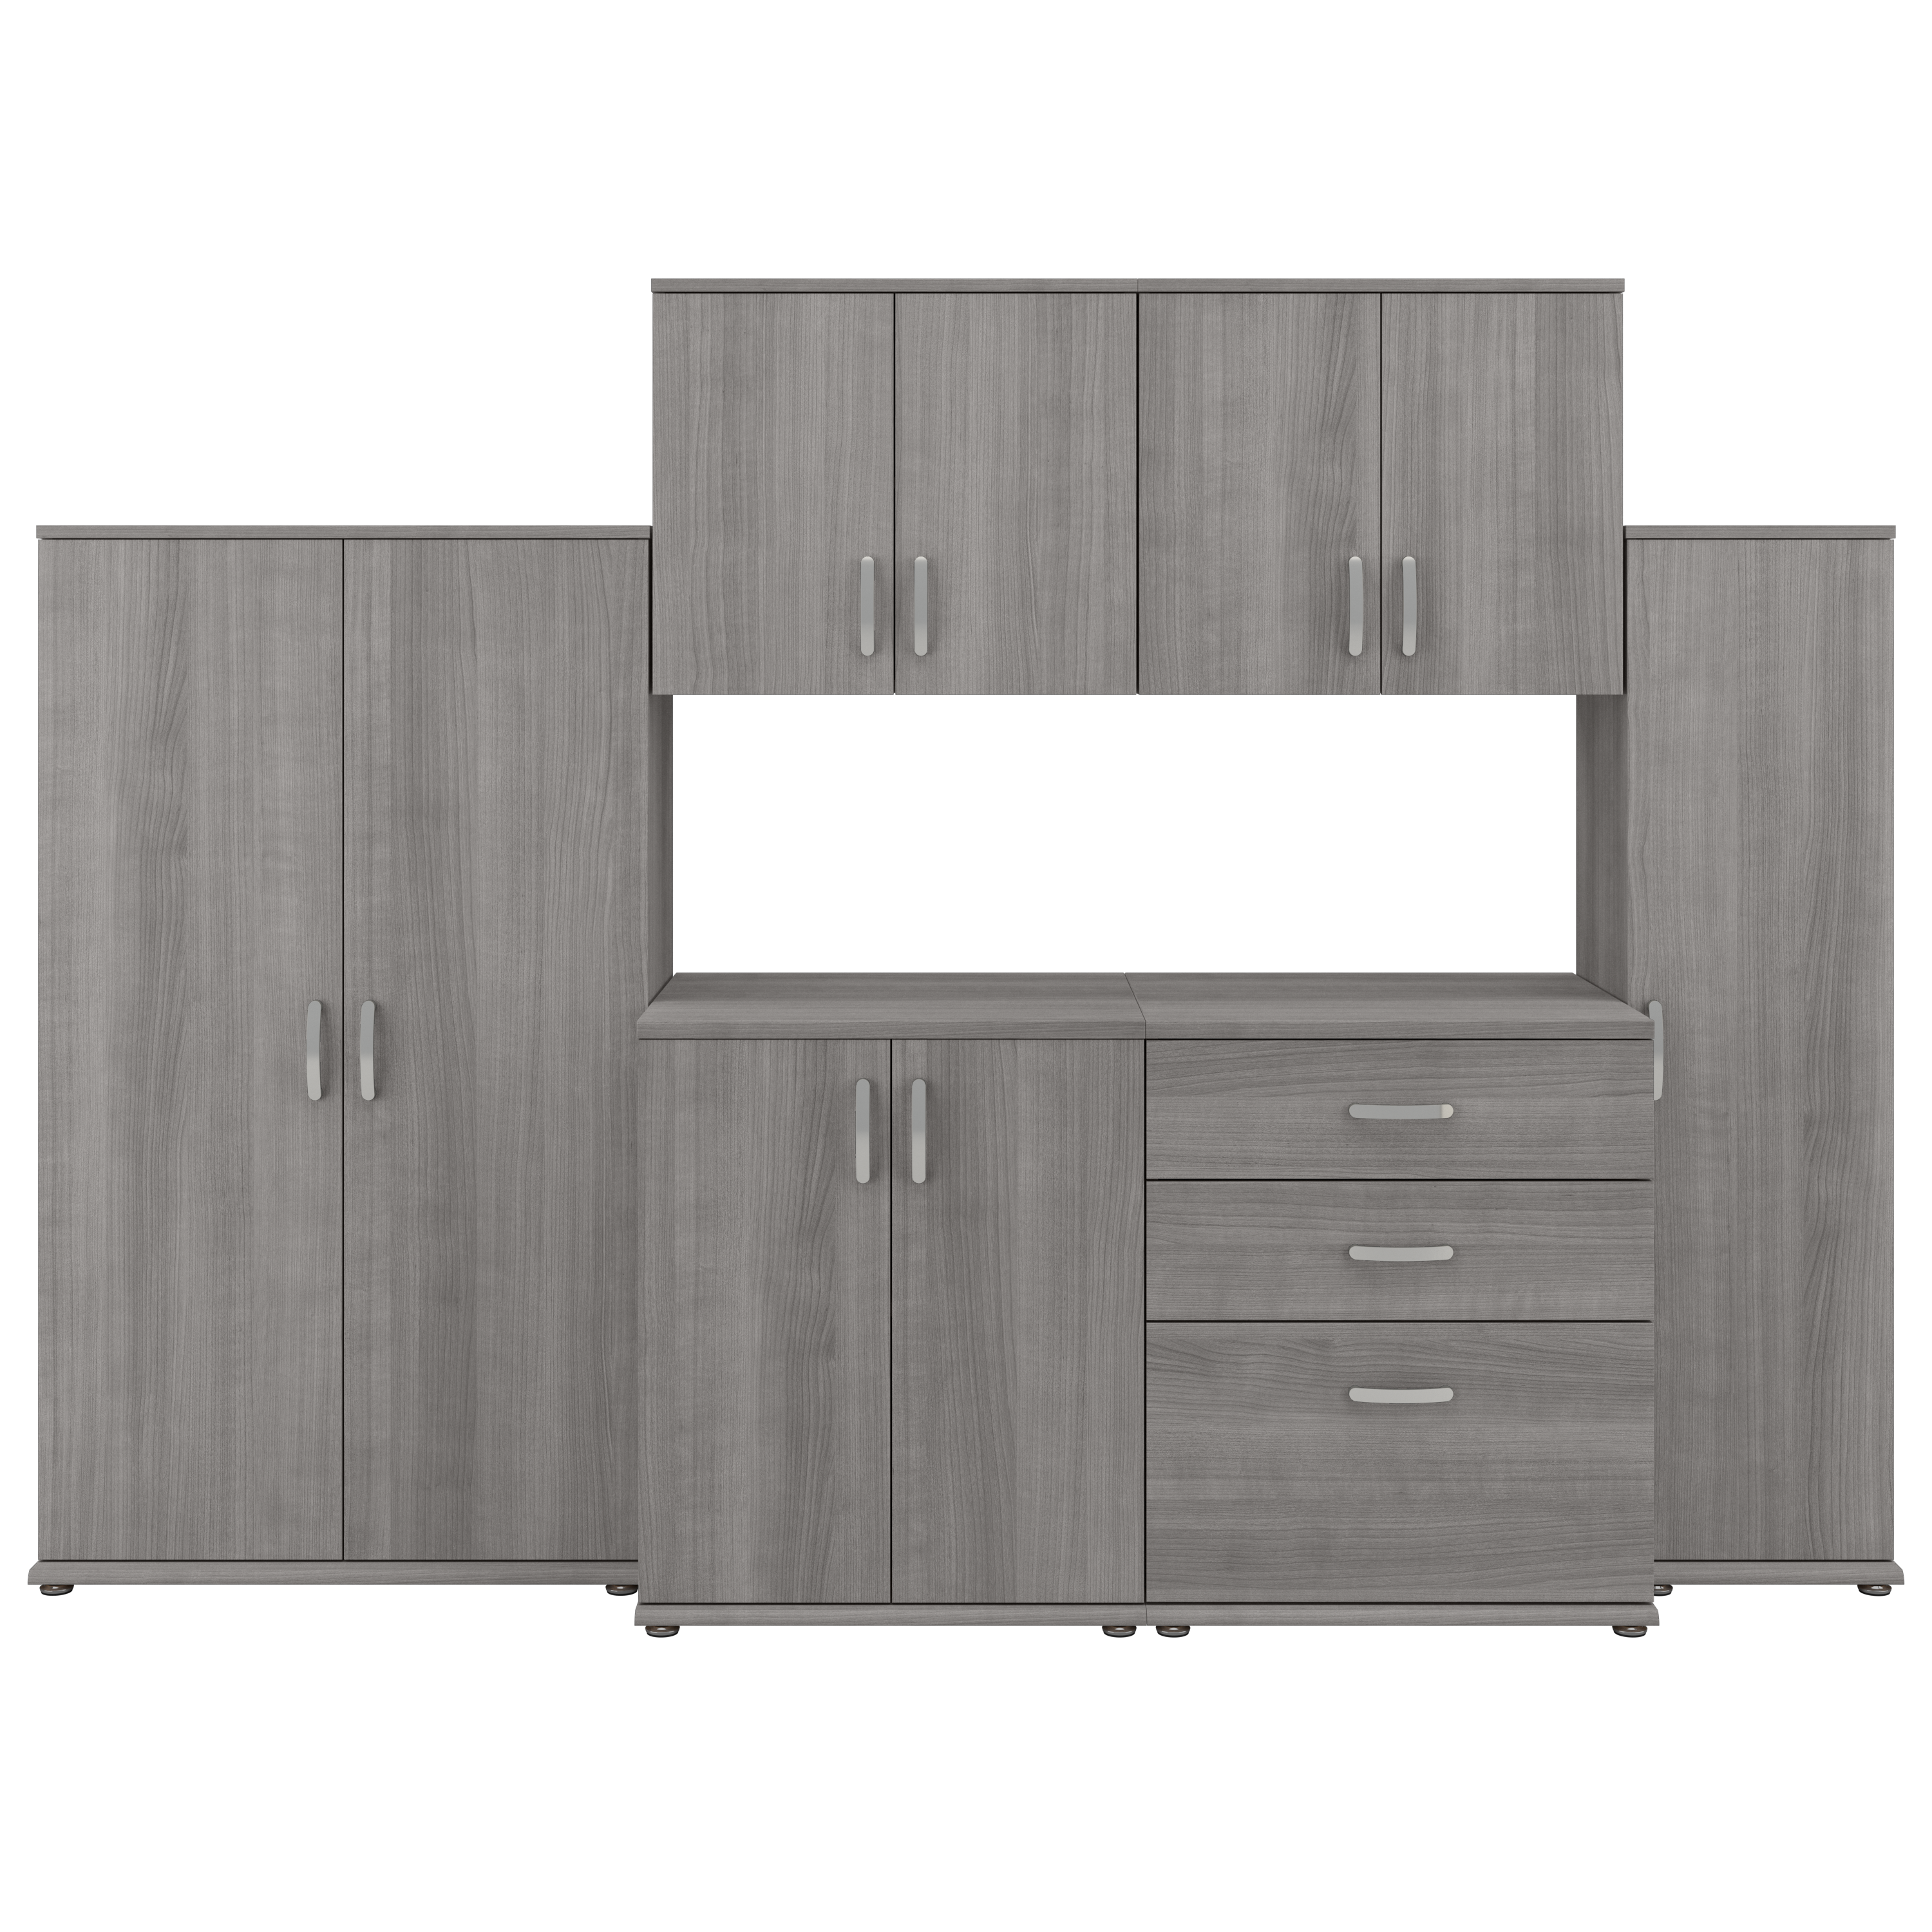 Shop Bush Business Furniture Universal 6 Piece Modular Garage Storage Set with Floor and Wall Cabinets 02 GAS002PG #color_platinum gray